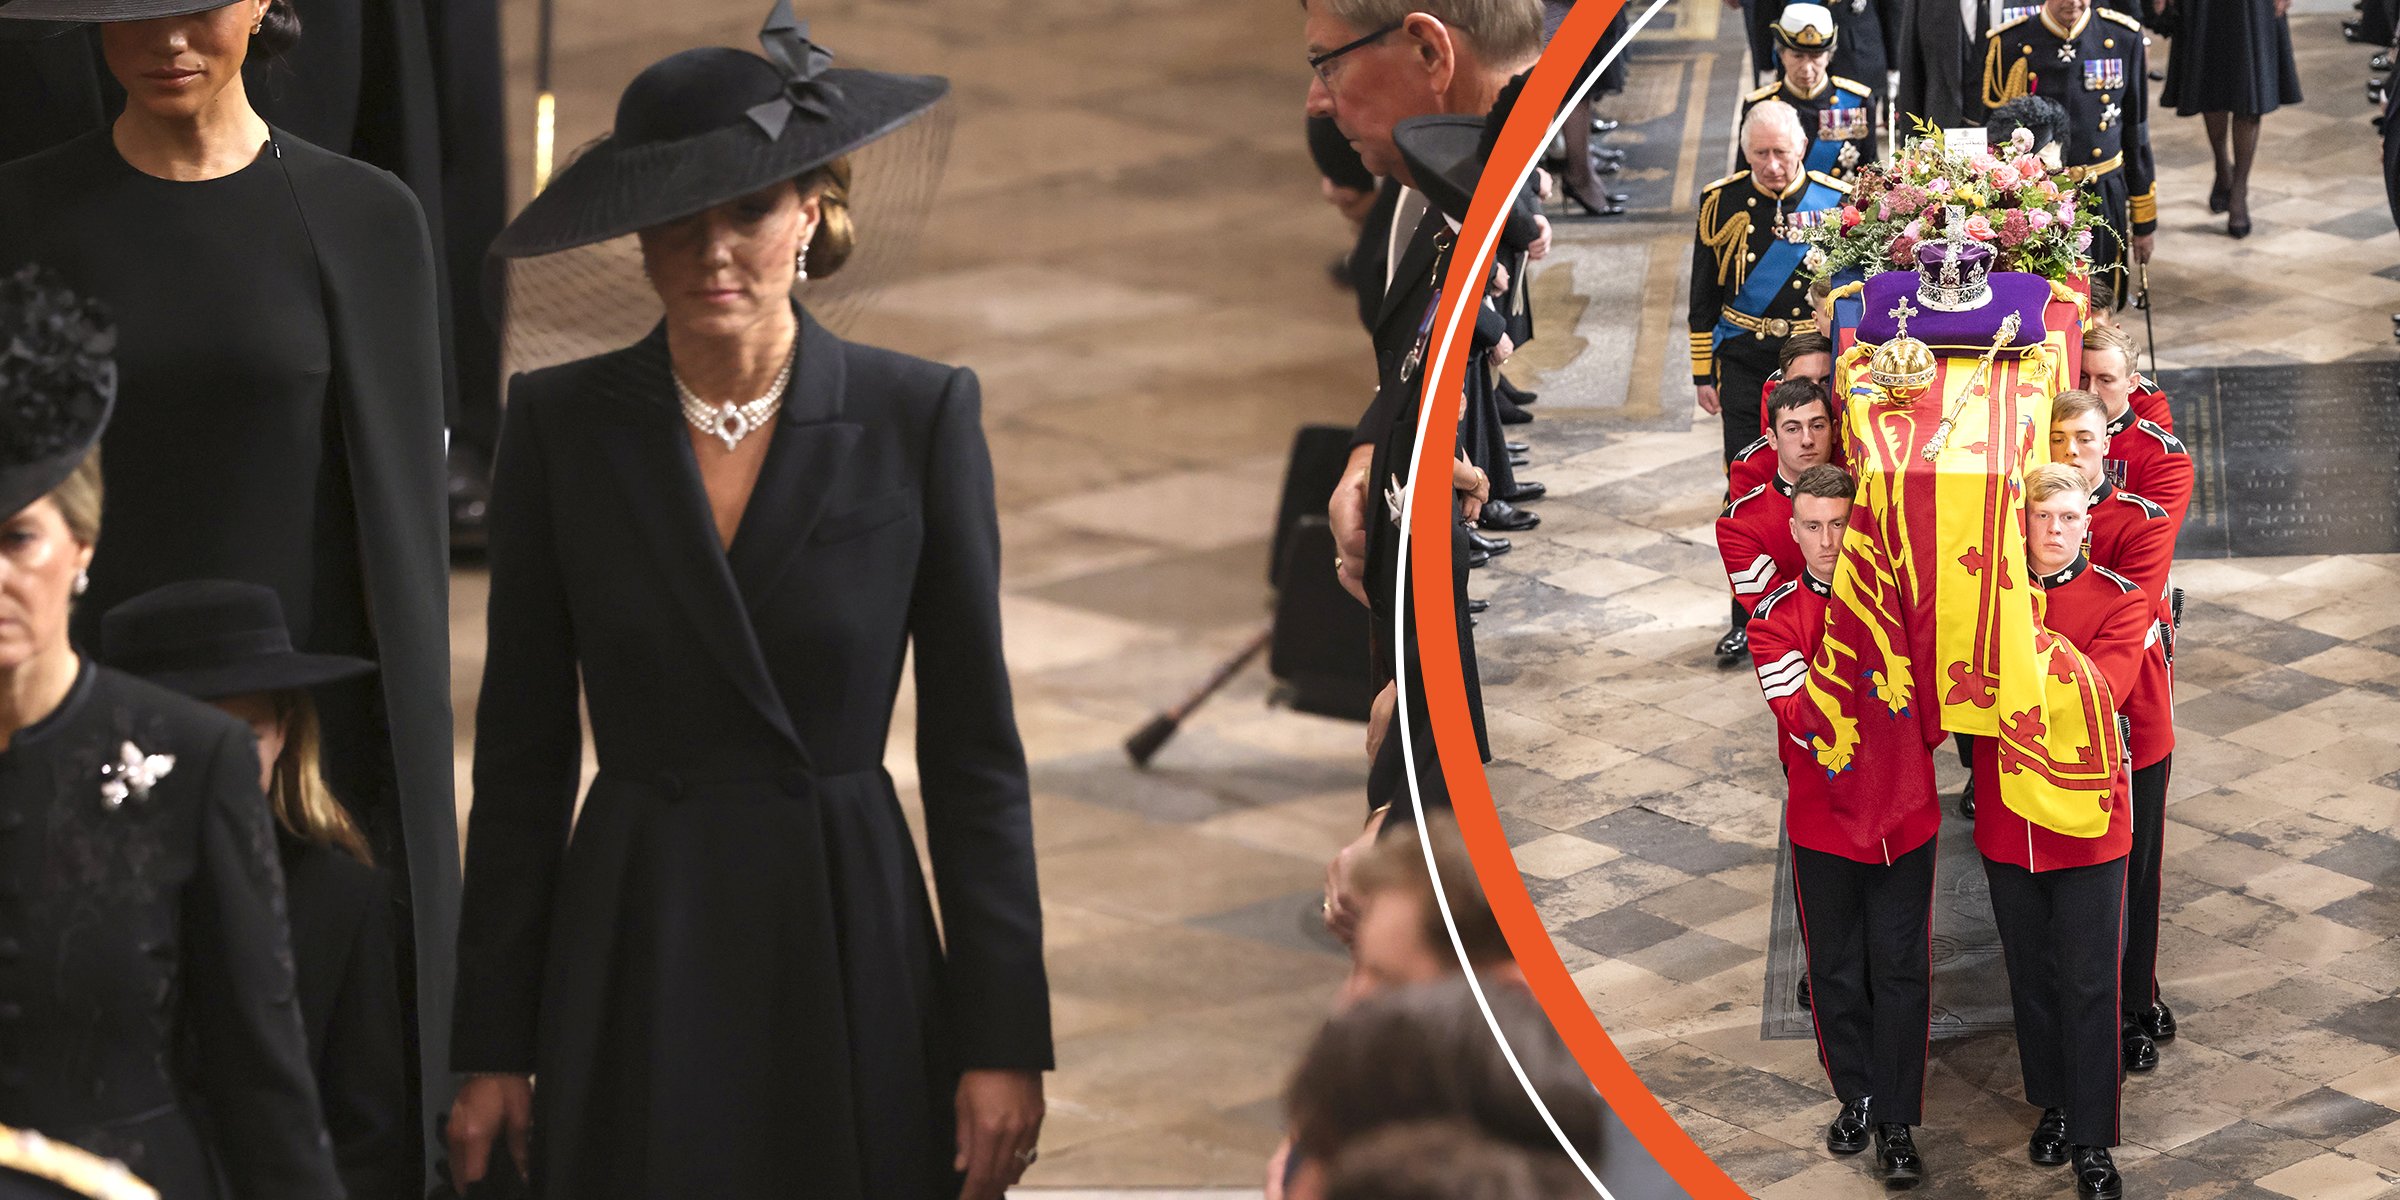 Princess Kate, 2022 | King Charles III and Queen Elizabeth II's coffin, 2022 | Source: Getty Images